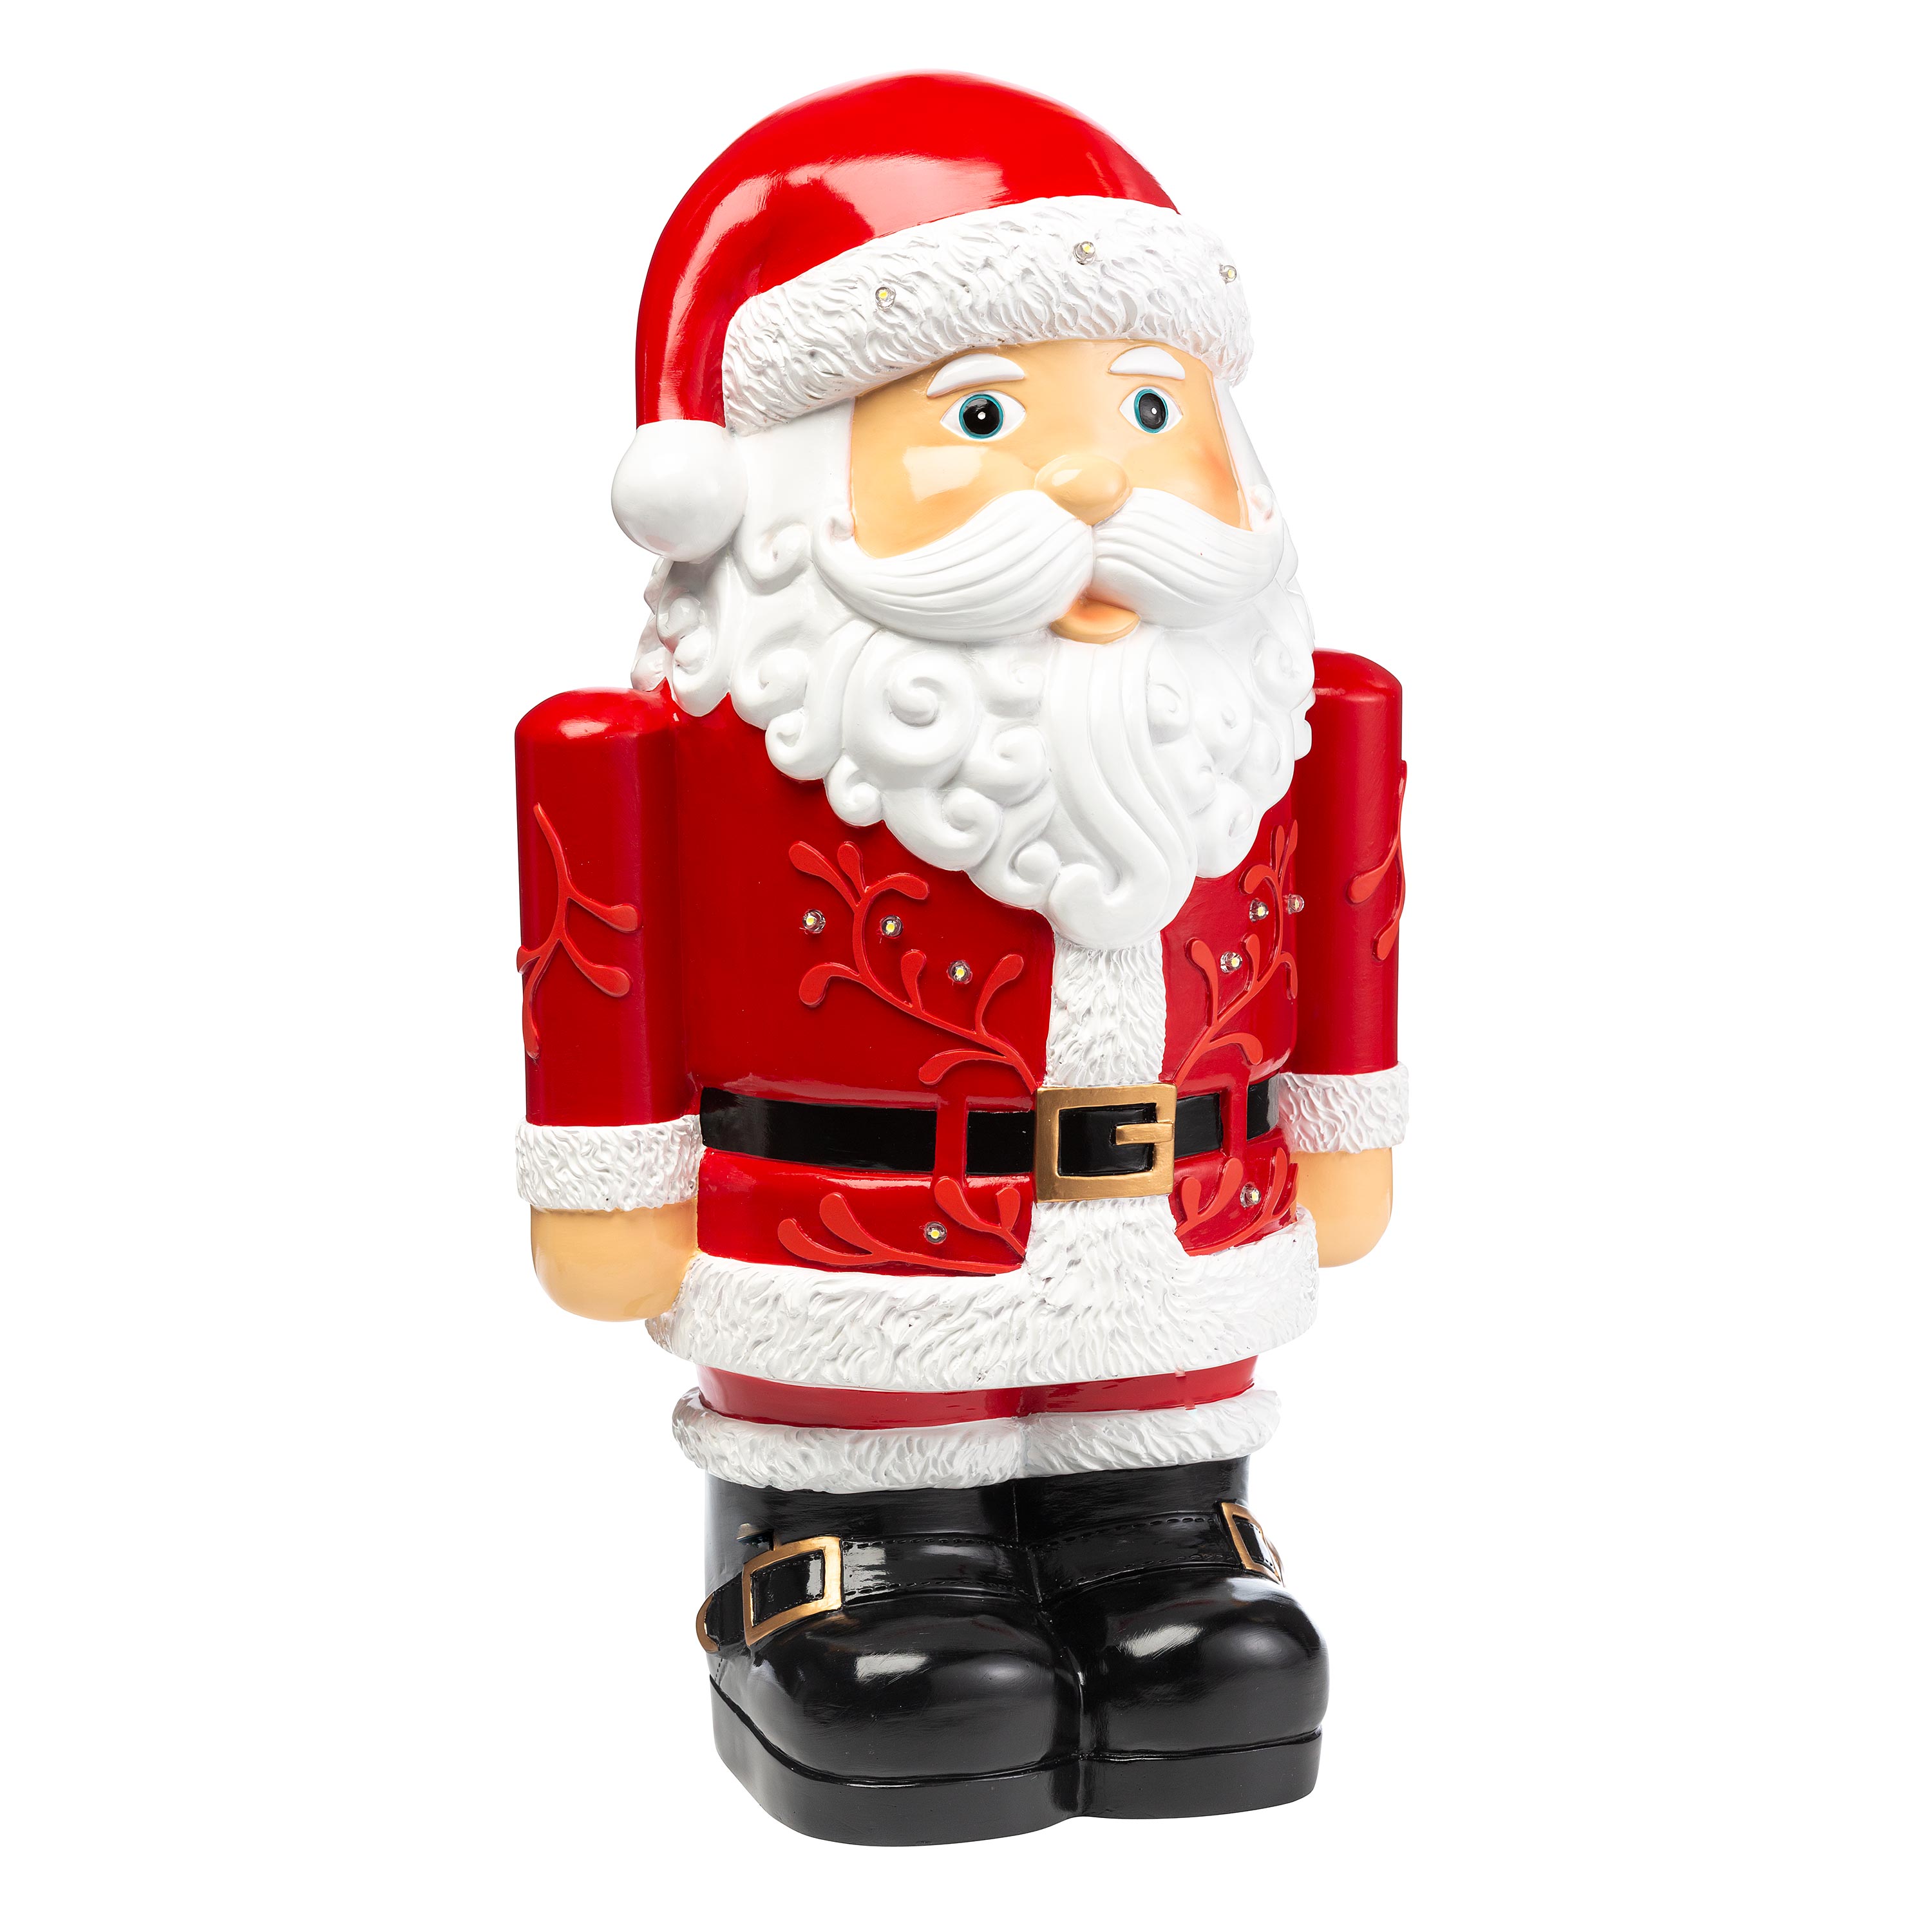 Indoor/Outdoor Lighted Santa Claus Shorty Statue